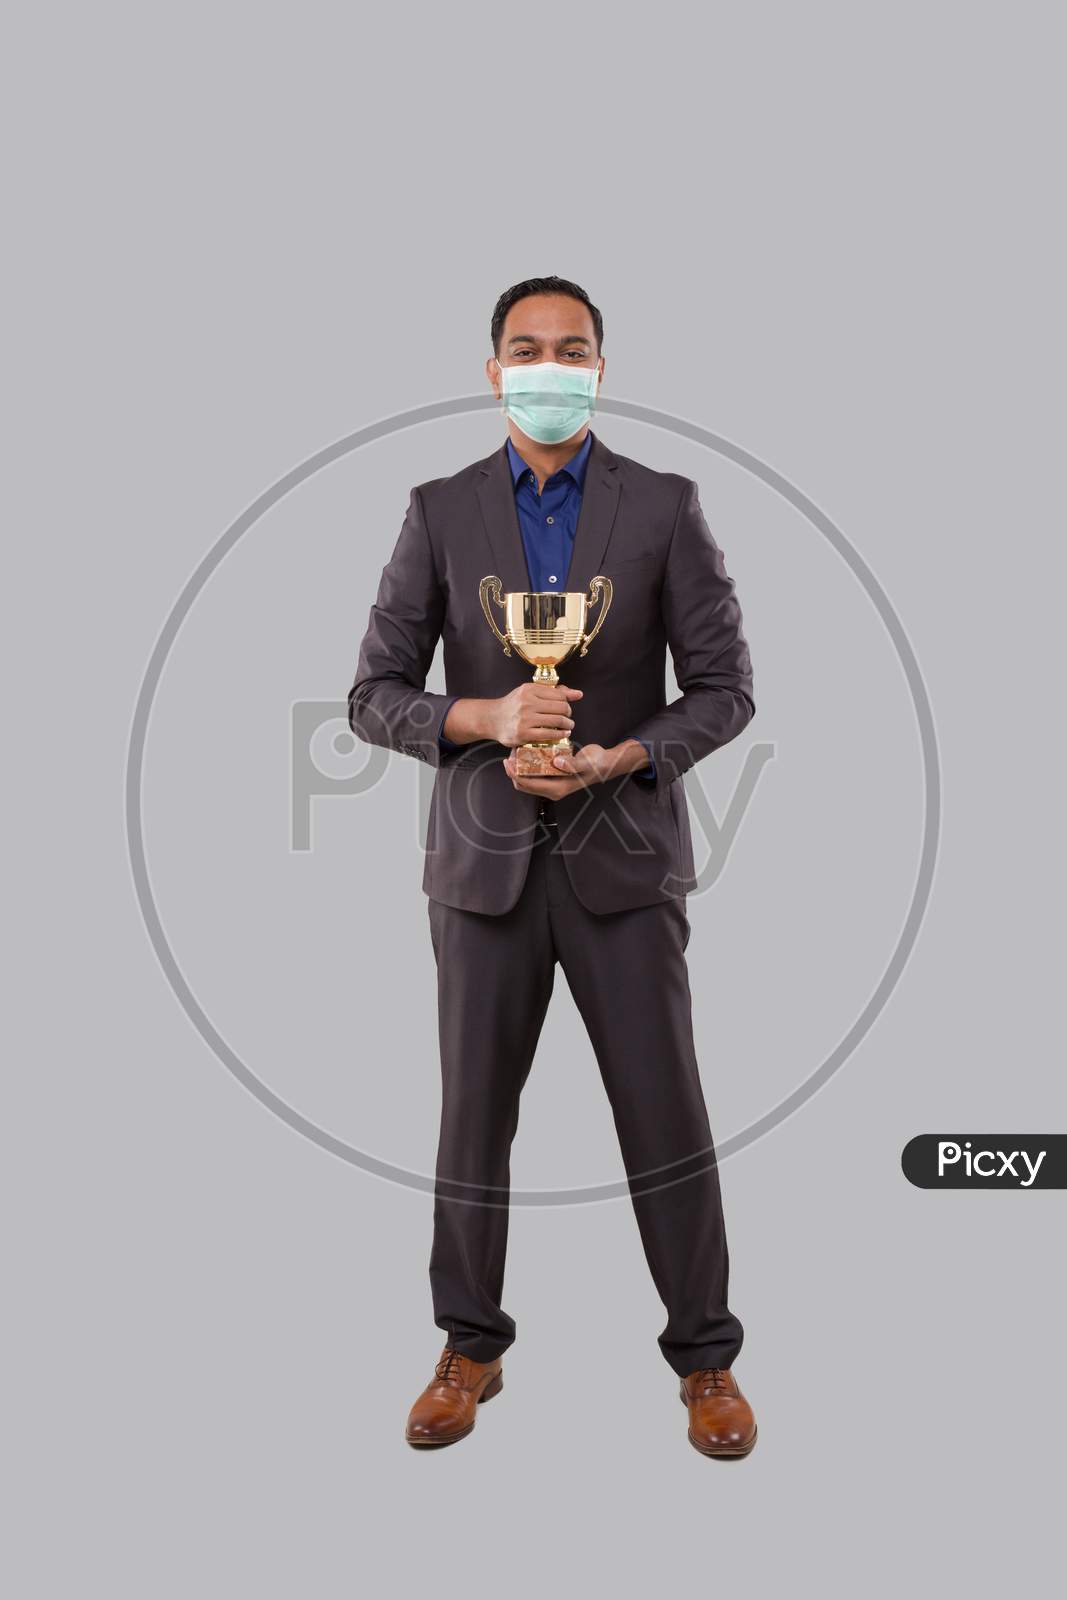 Businessman Holding Trophy Wearing Medical Mask. Indian Businessman Standing Full Length With Trophy In Hands